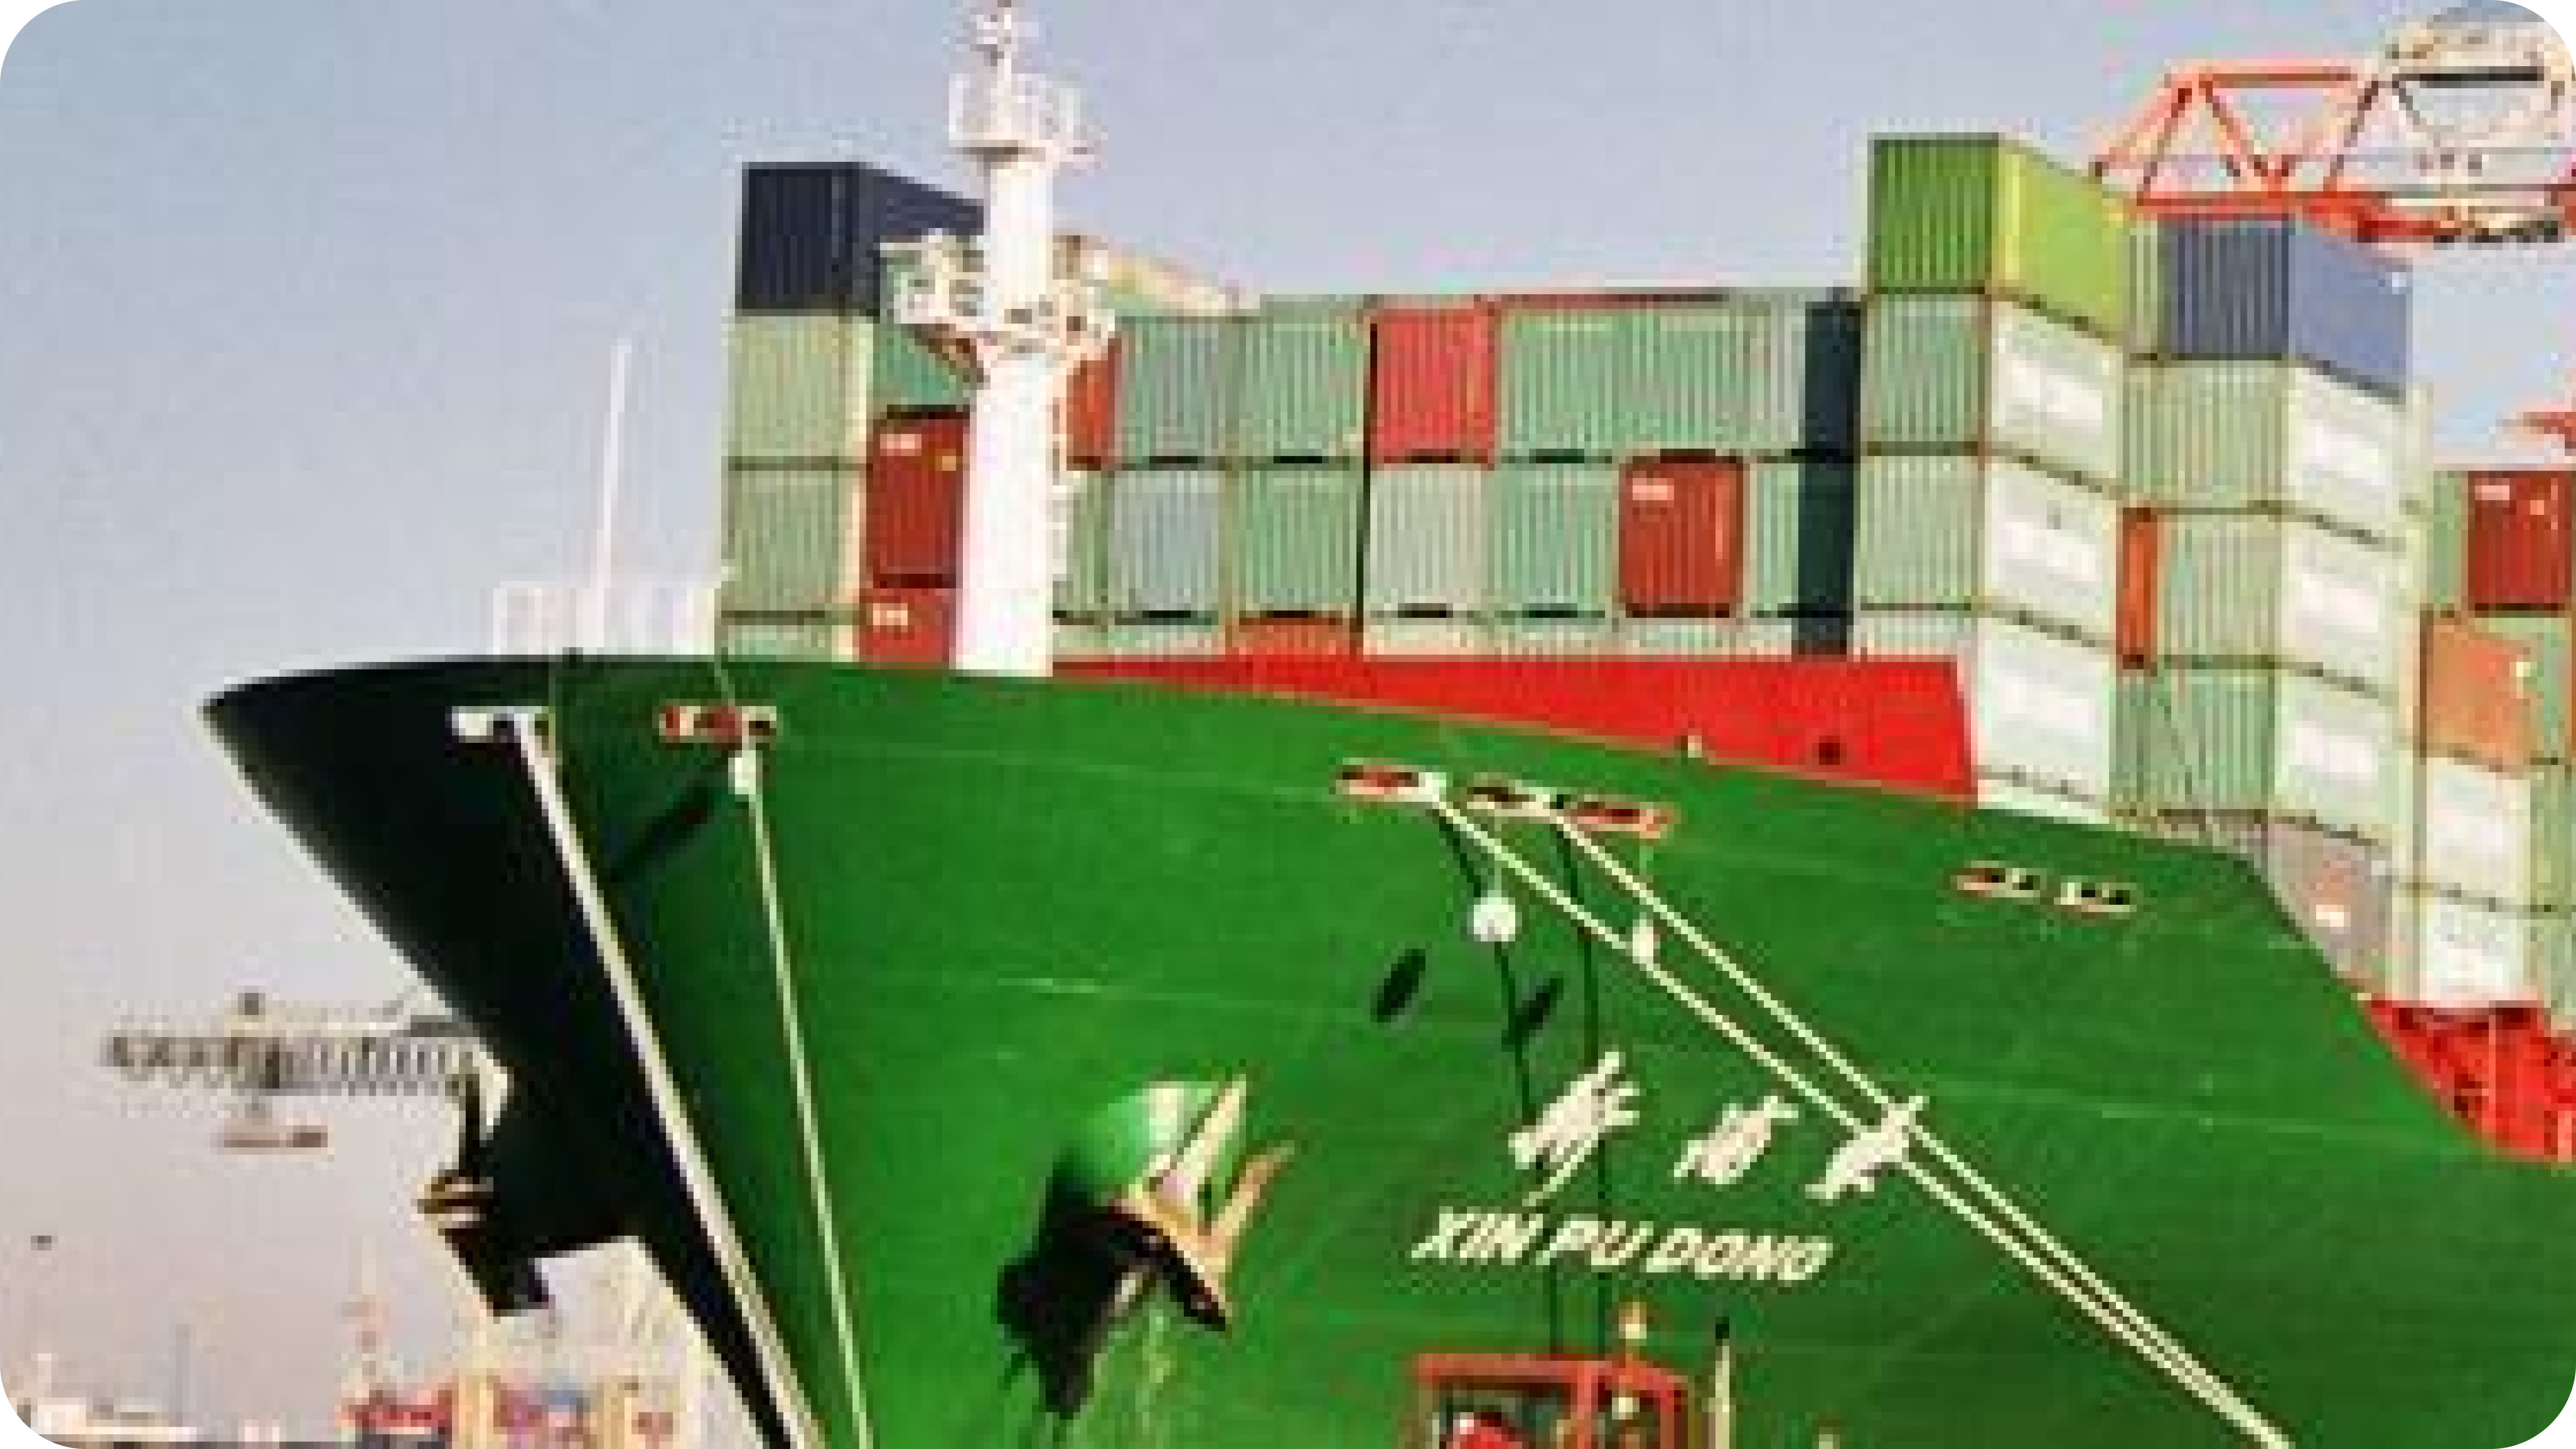 The First World's Biggest Container Vessel in 2014